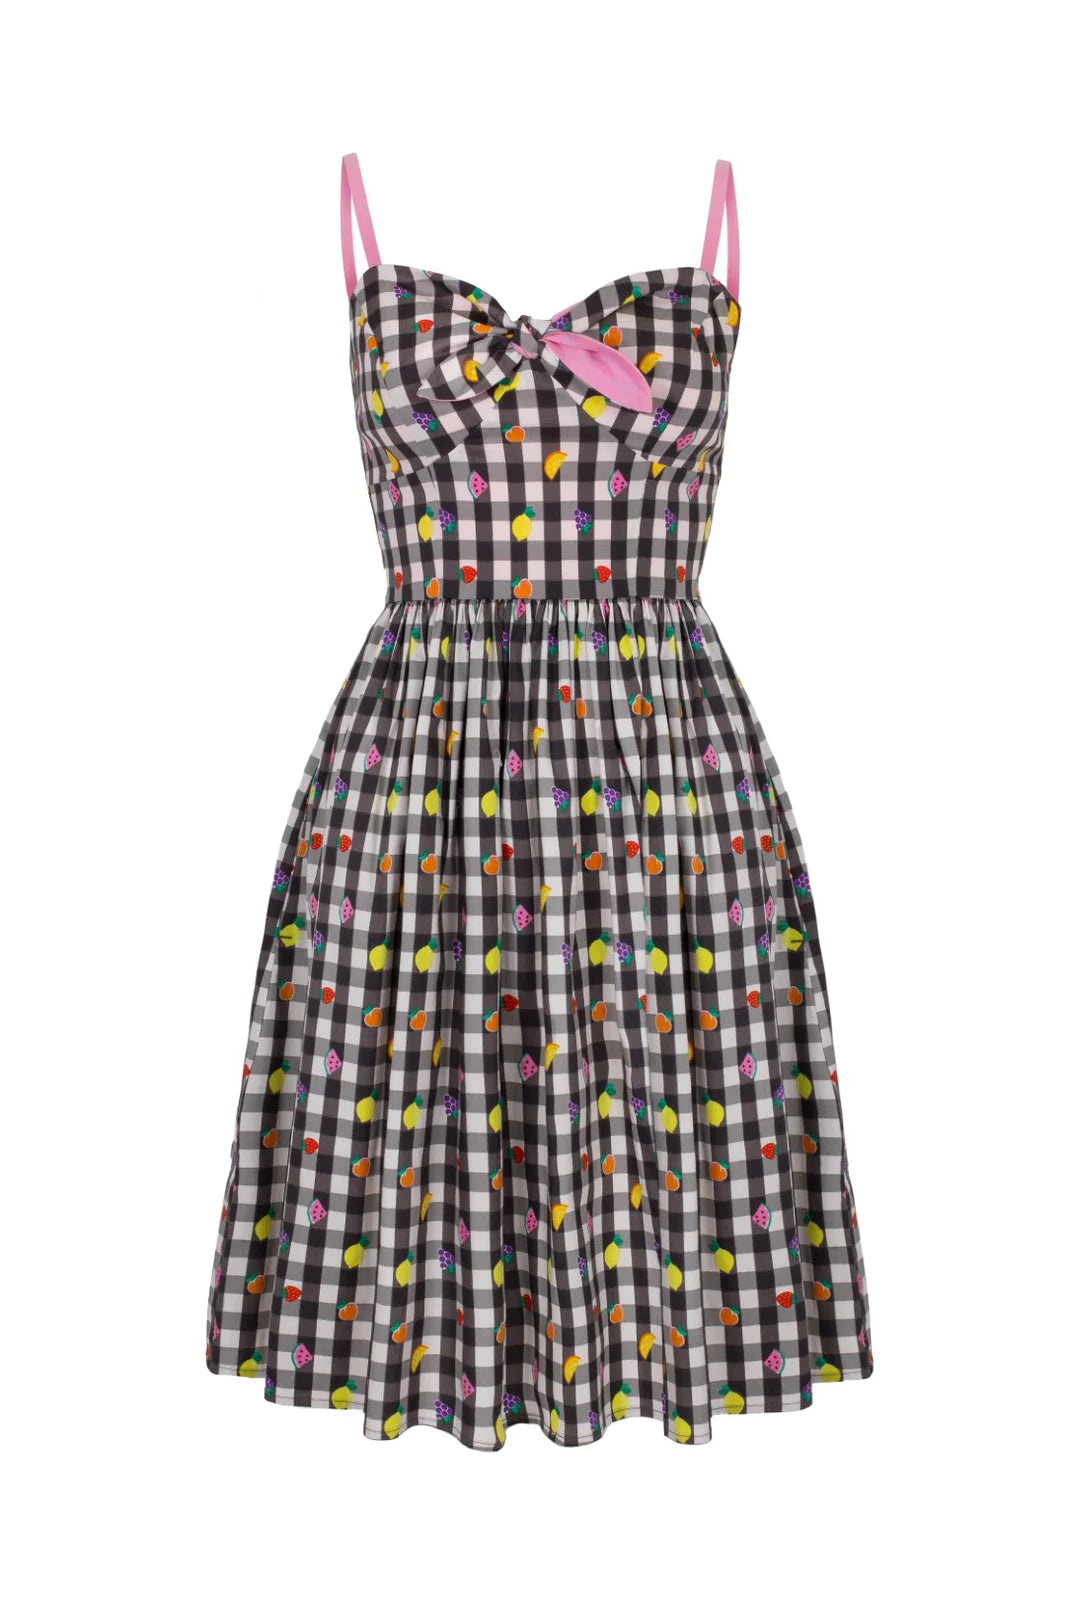 The Hell Bunny Fruitylou grey and white gingham print mid dress on a plain white background from the front.